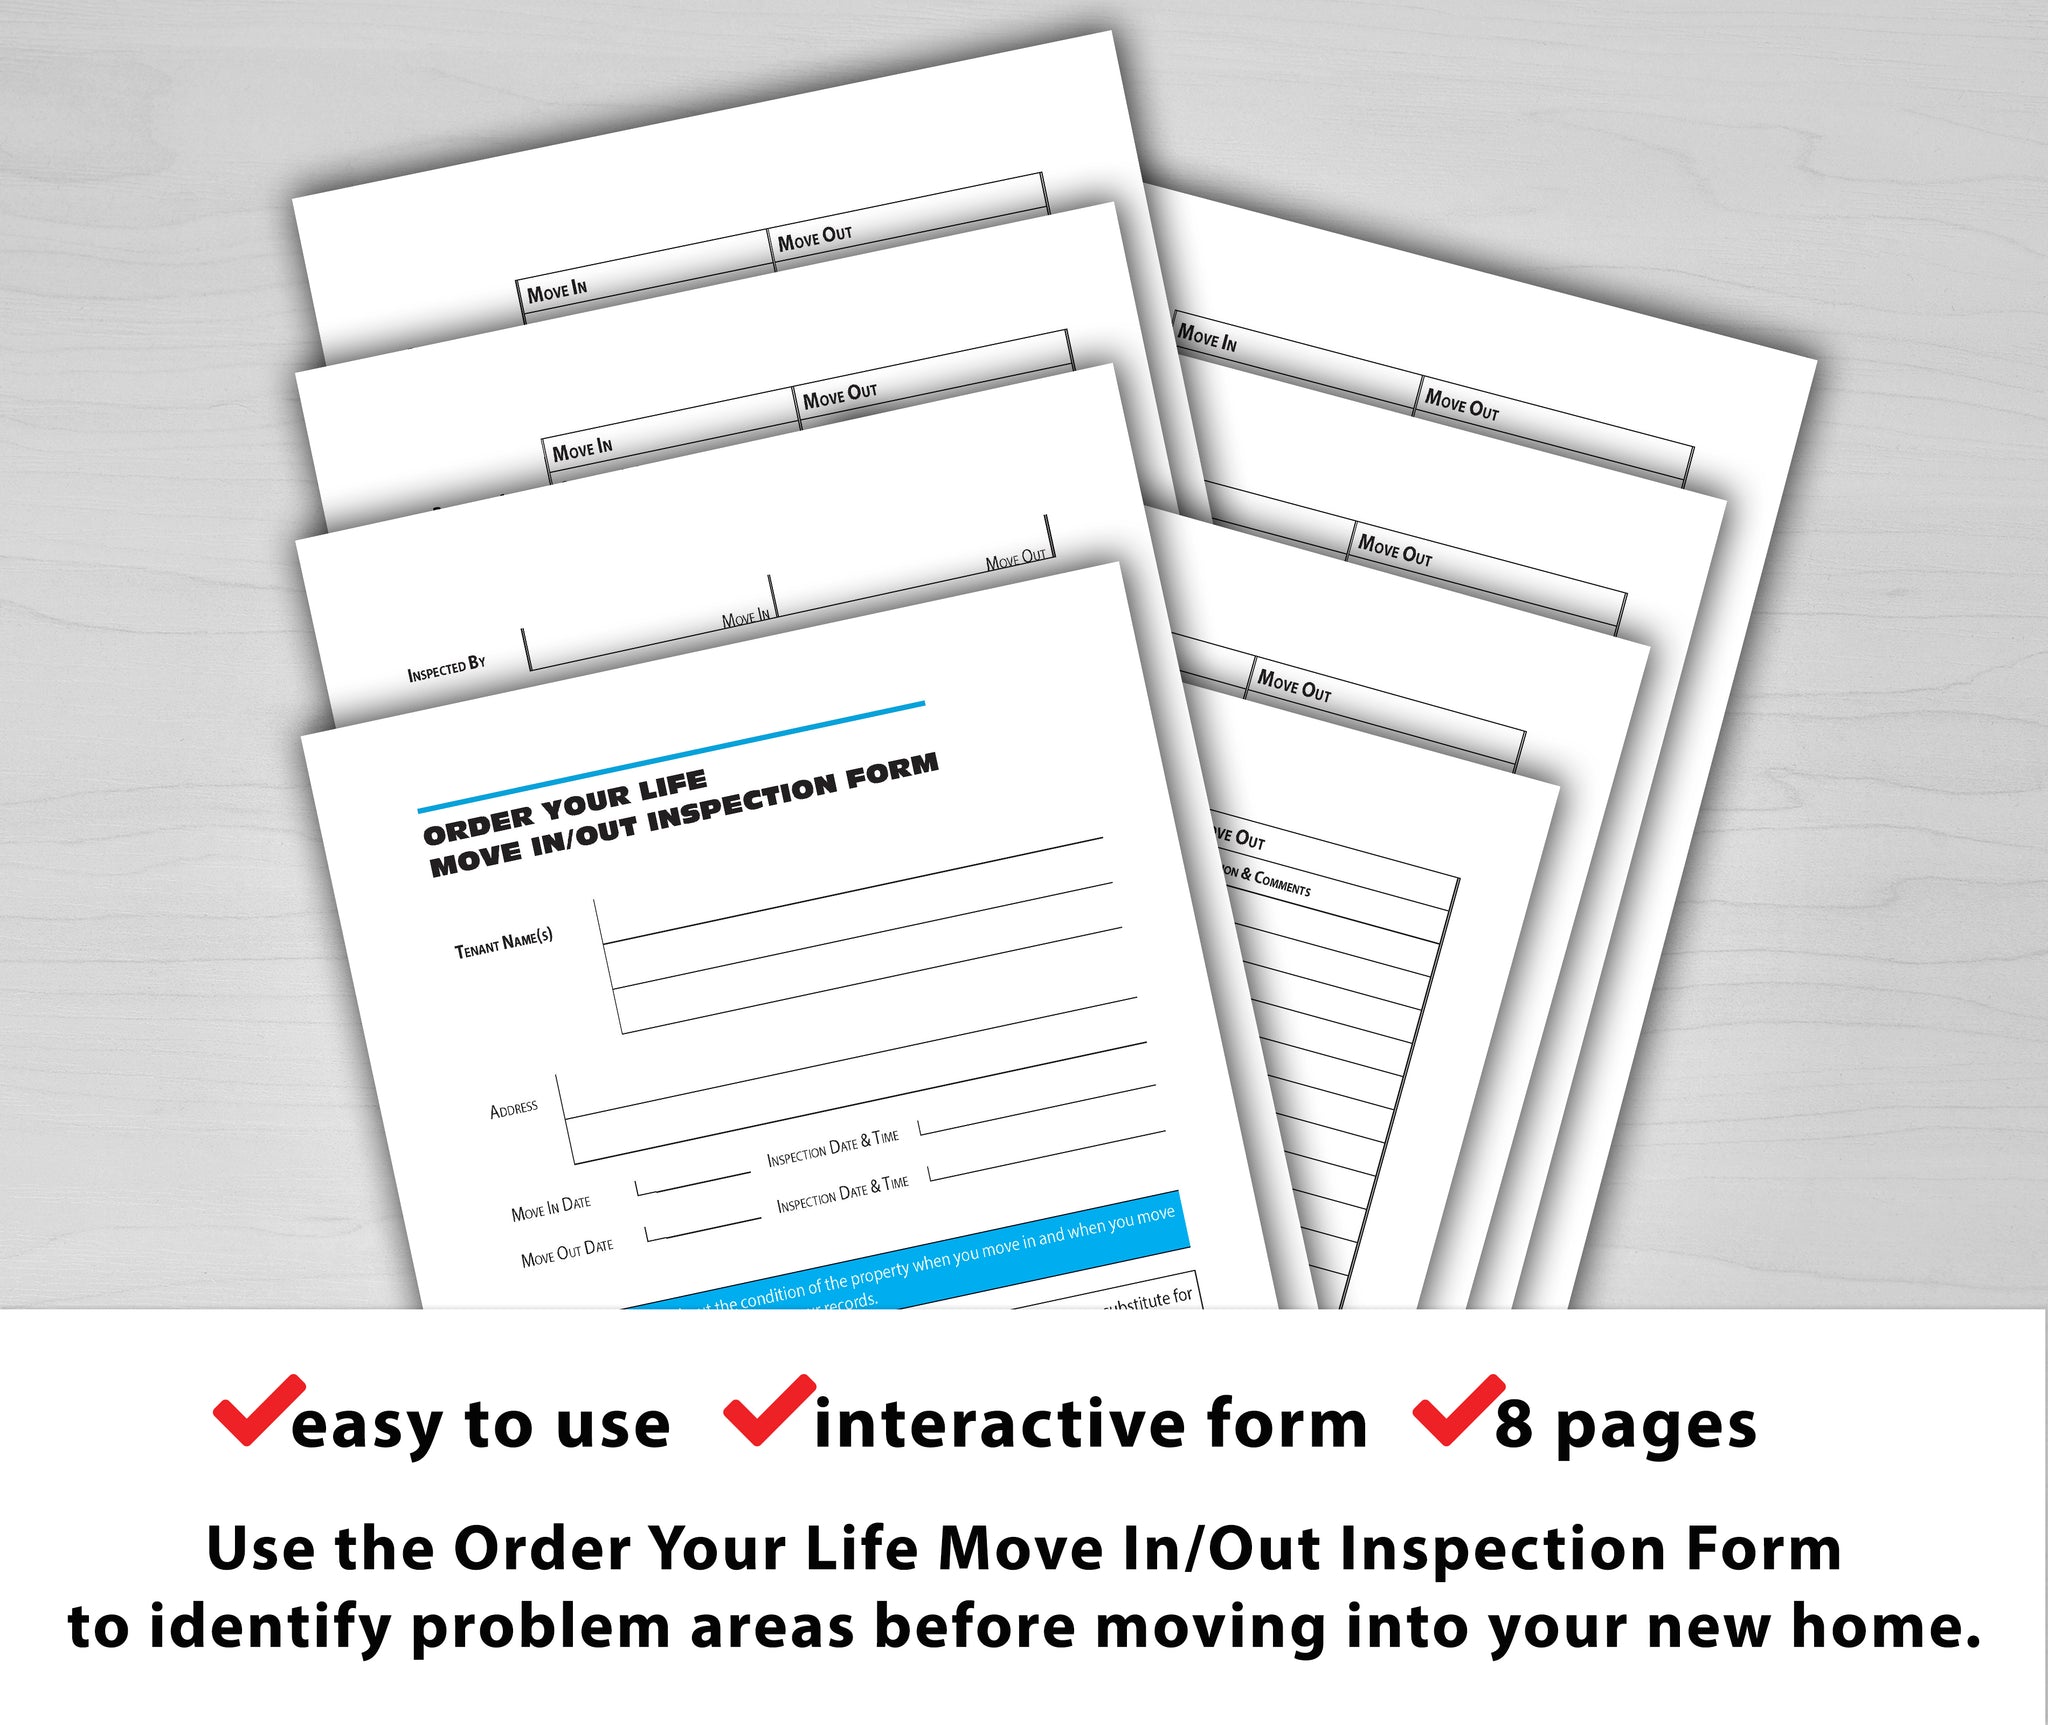 Order Your Life Move In/Out Inspection Form